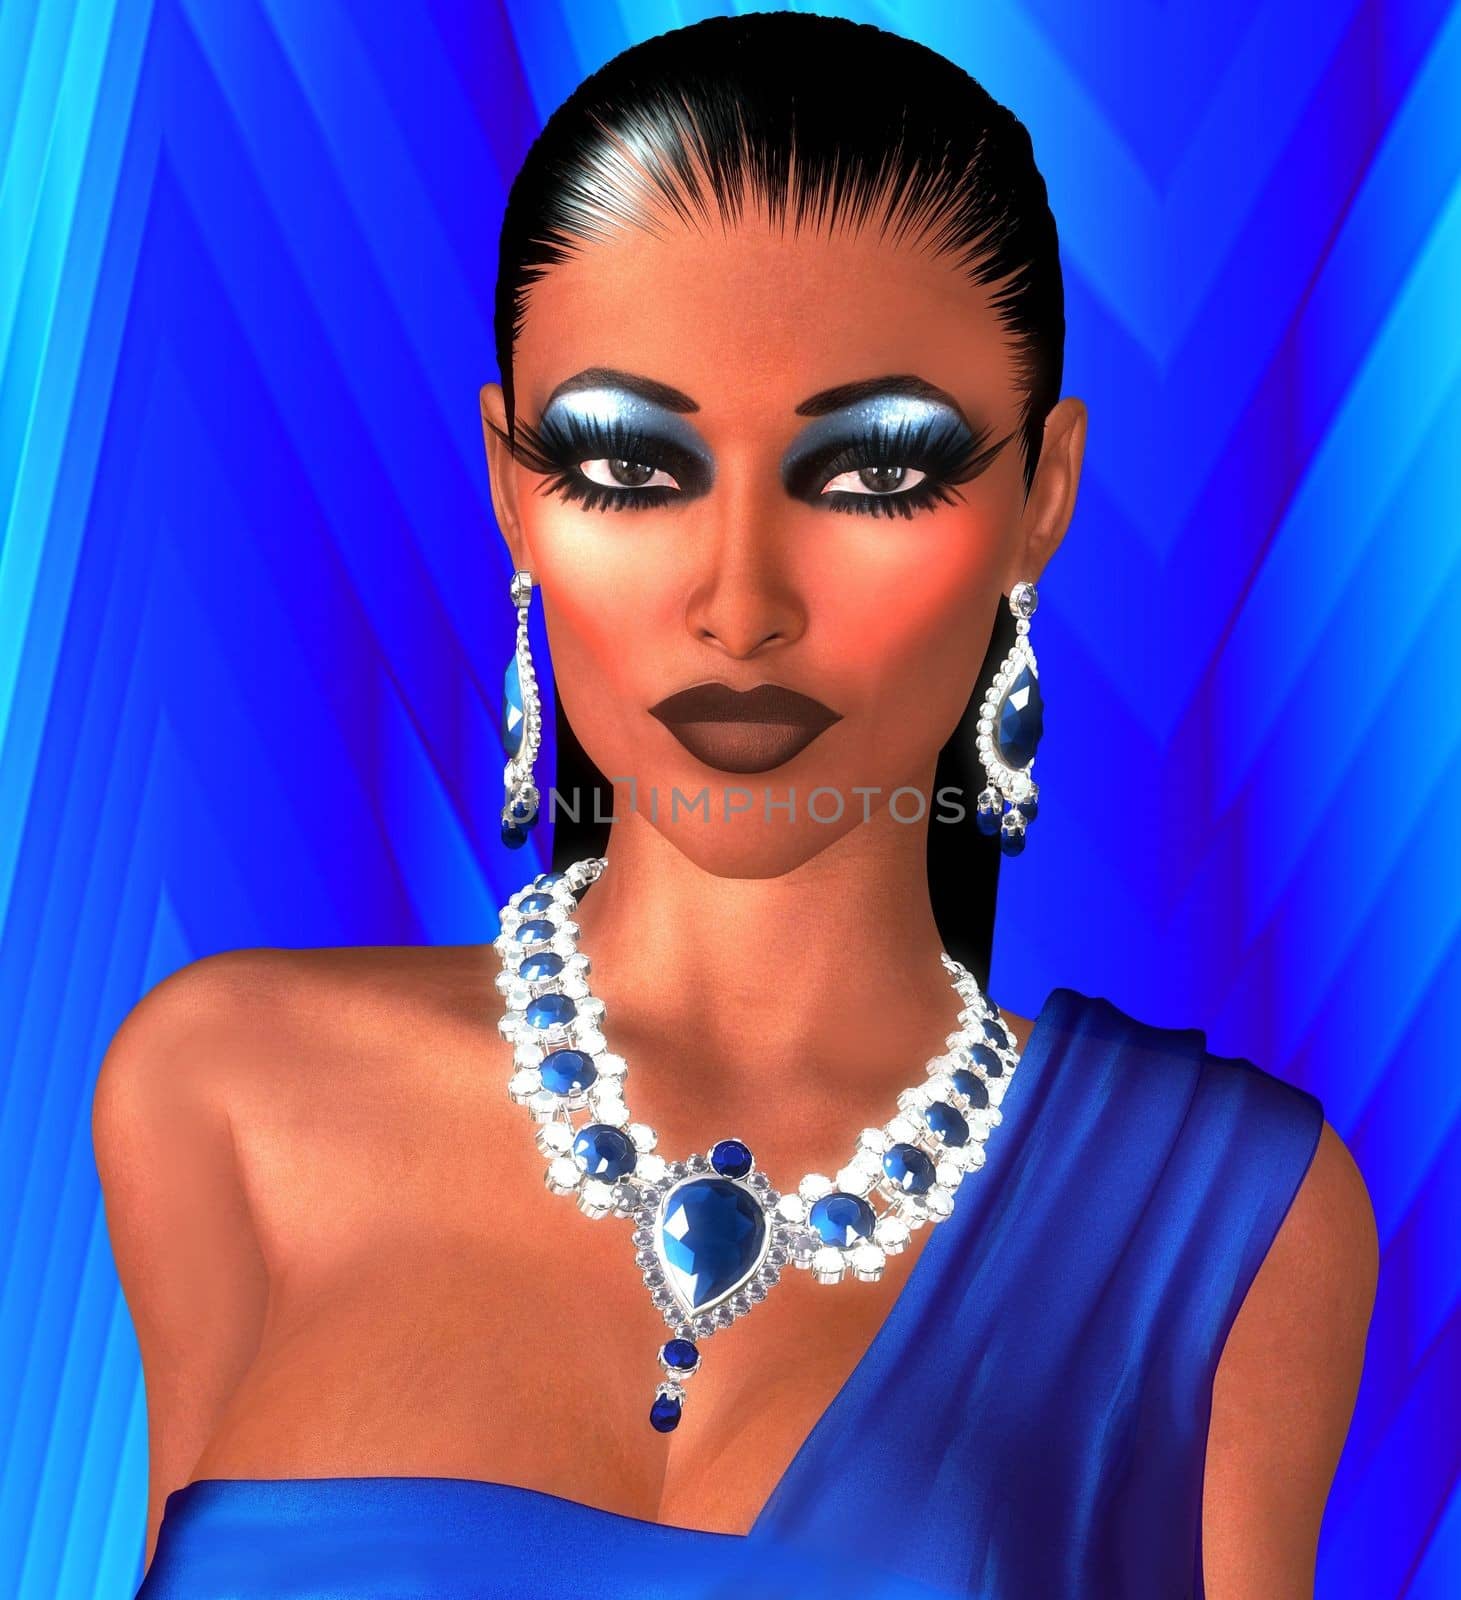 A wet hair look suits this elegant woman with deep blue sapphire jewels on a blue background. Evening looks even more inviting upon the sight of this woman's eyes, makeup and sapphire necklace.